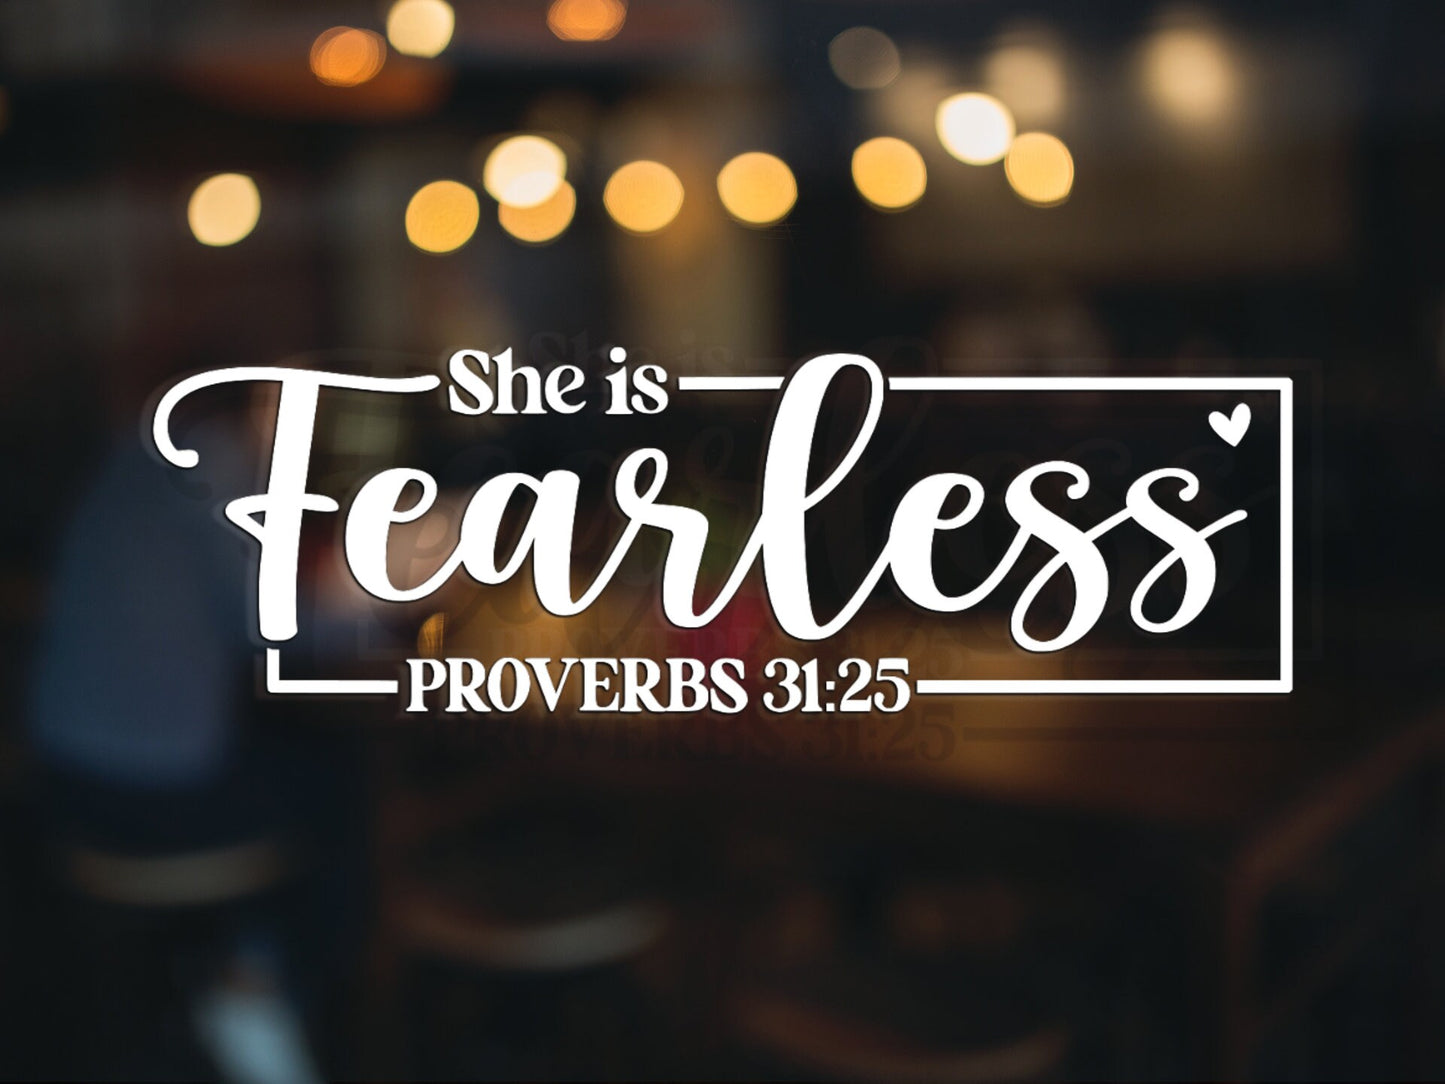 She is Fearless Proverbs 31:25 Decal - Many Colors & Sizes